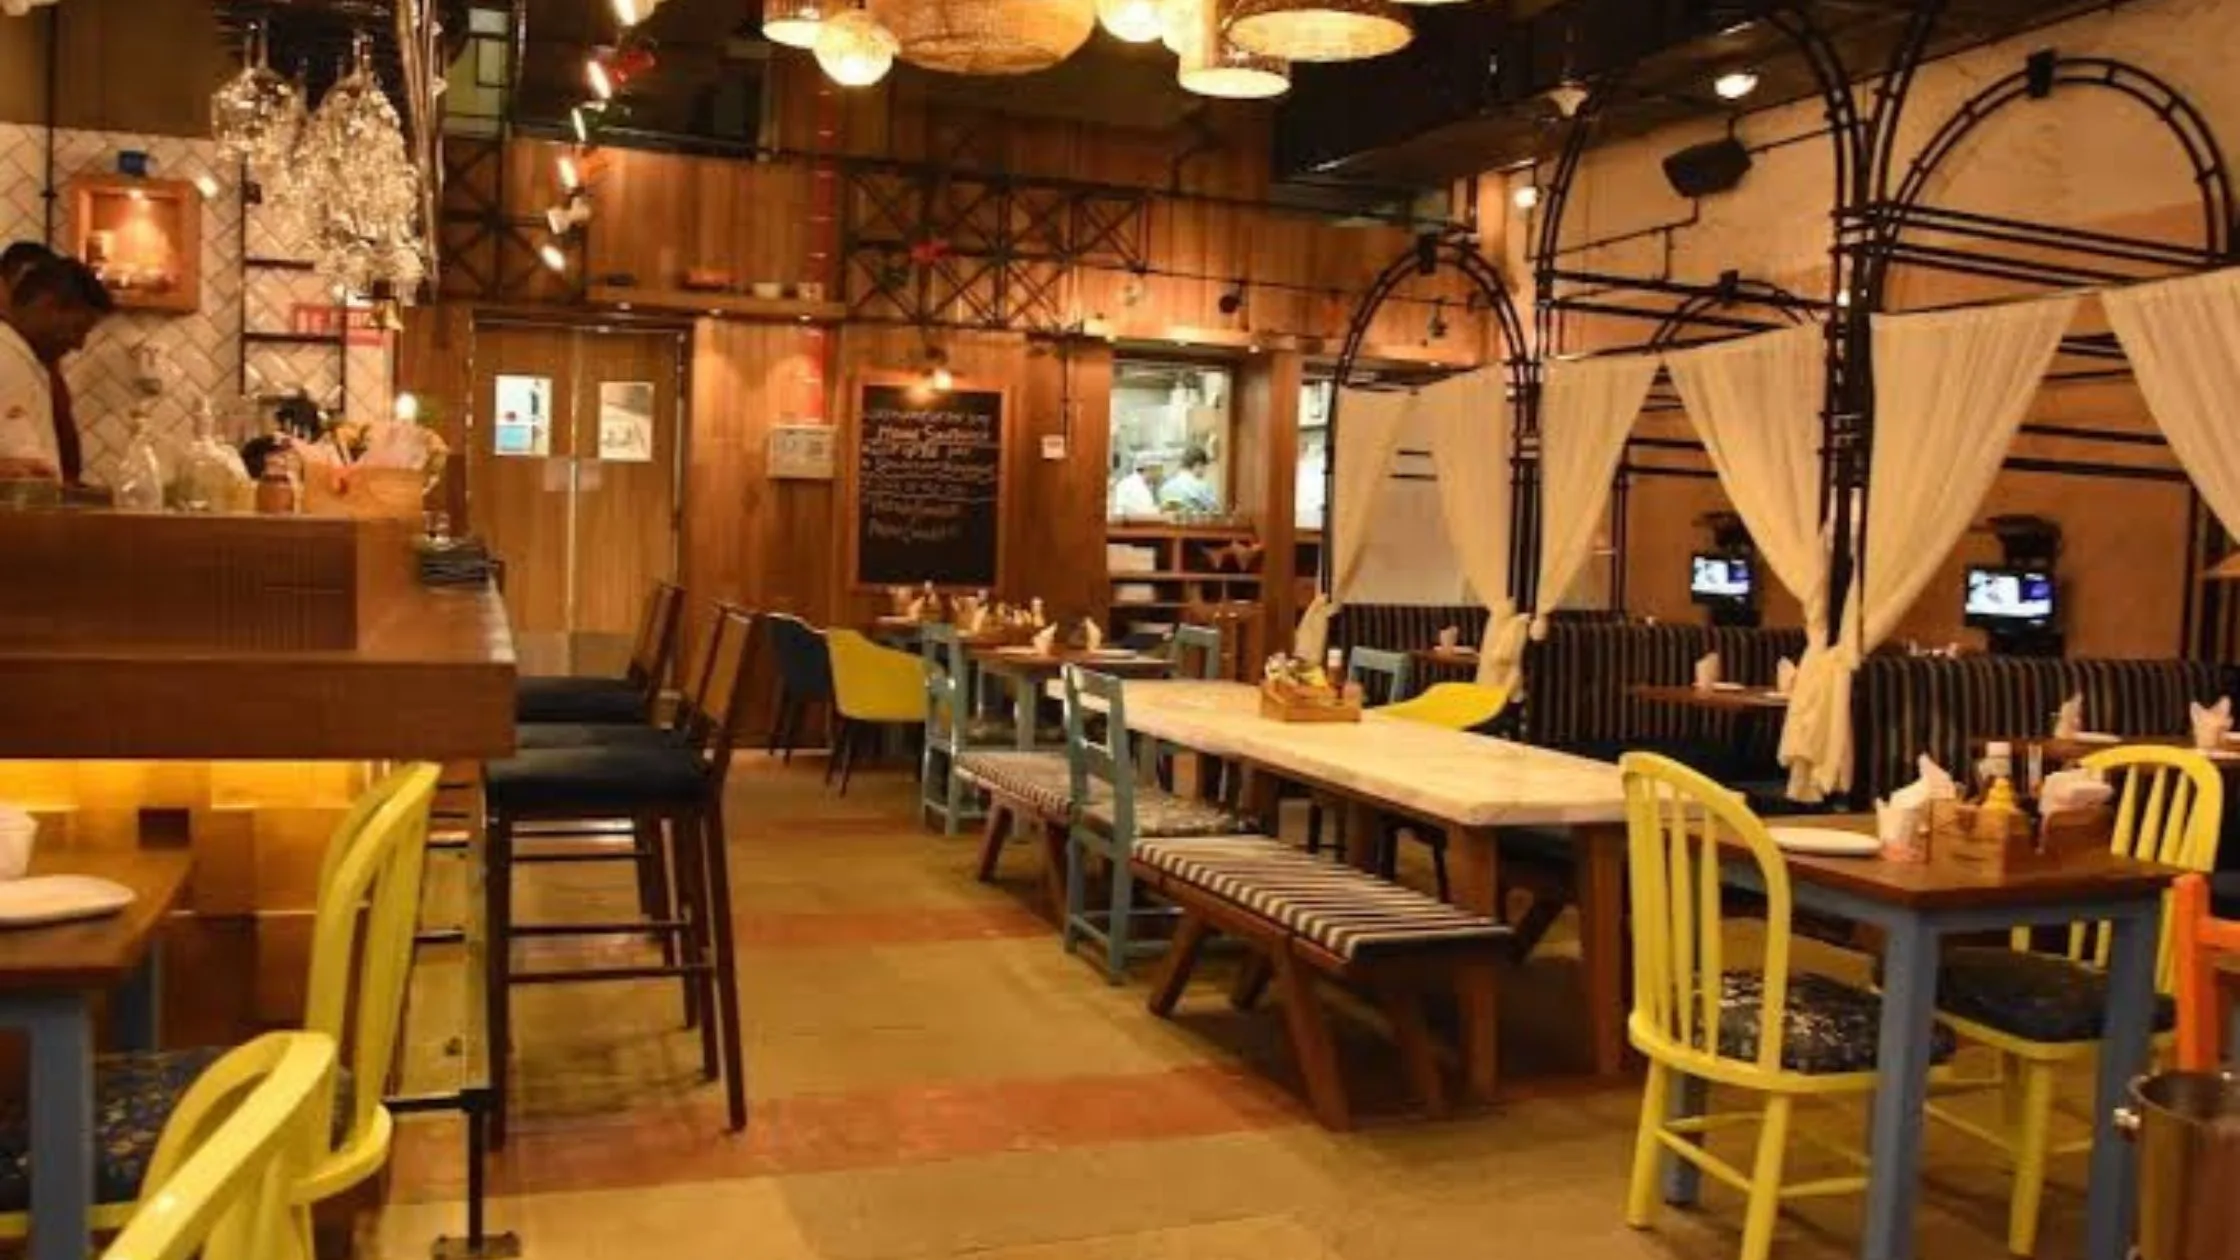 An inside view of Cafe Delhi Heights.